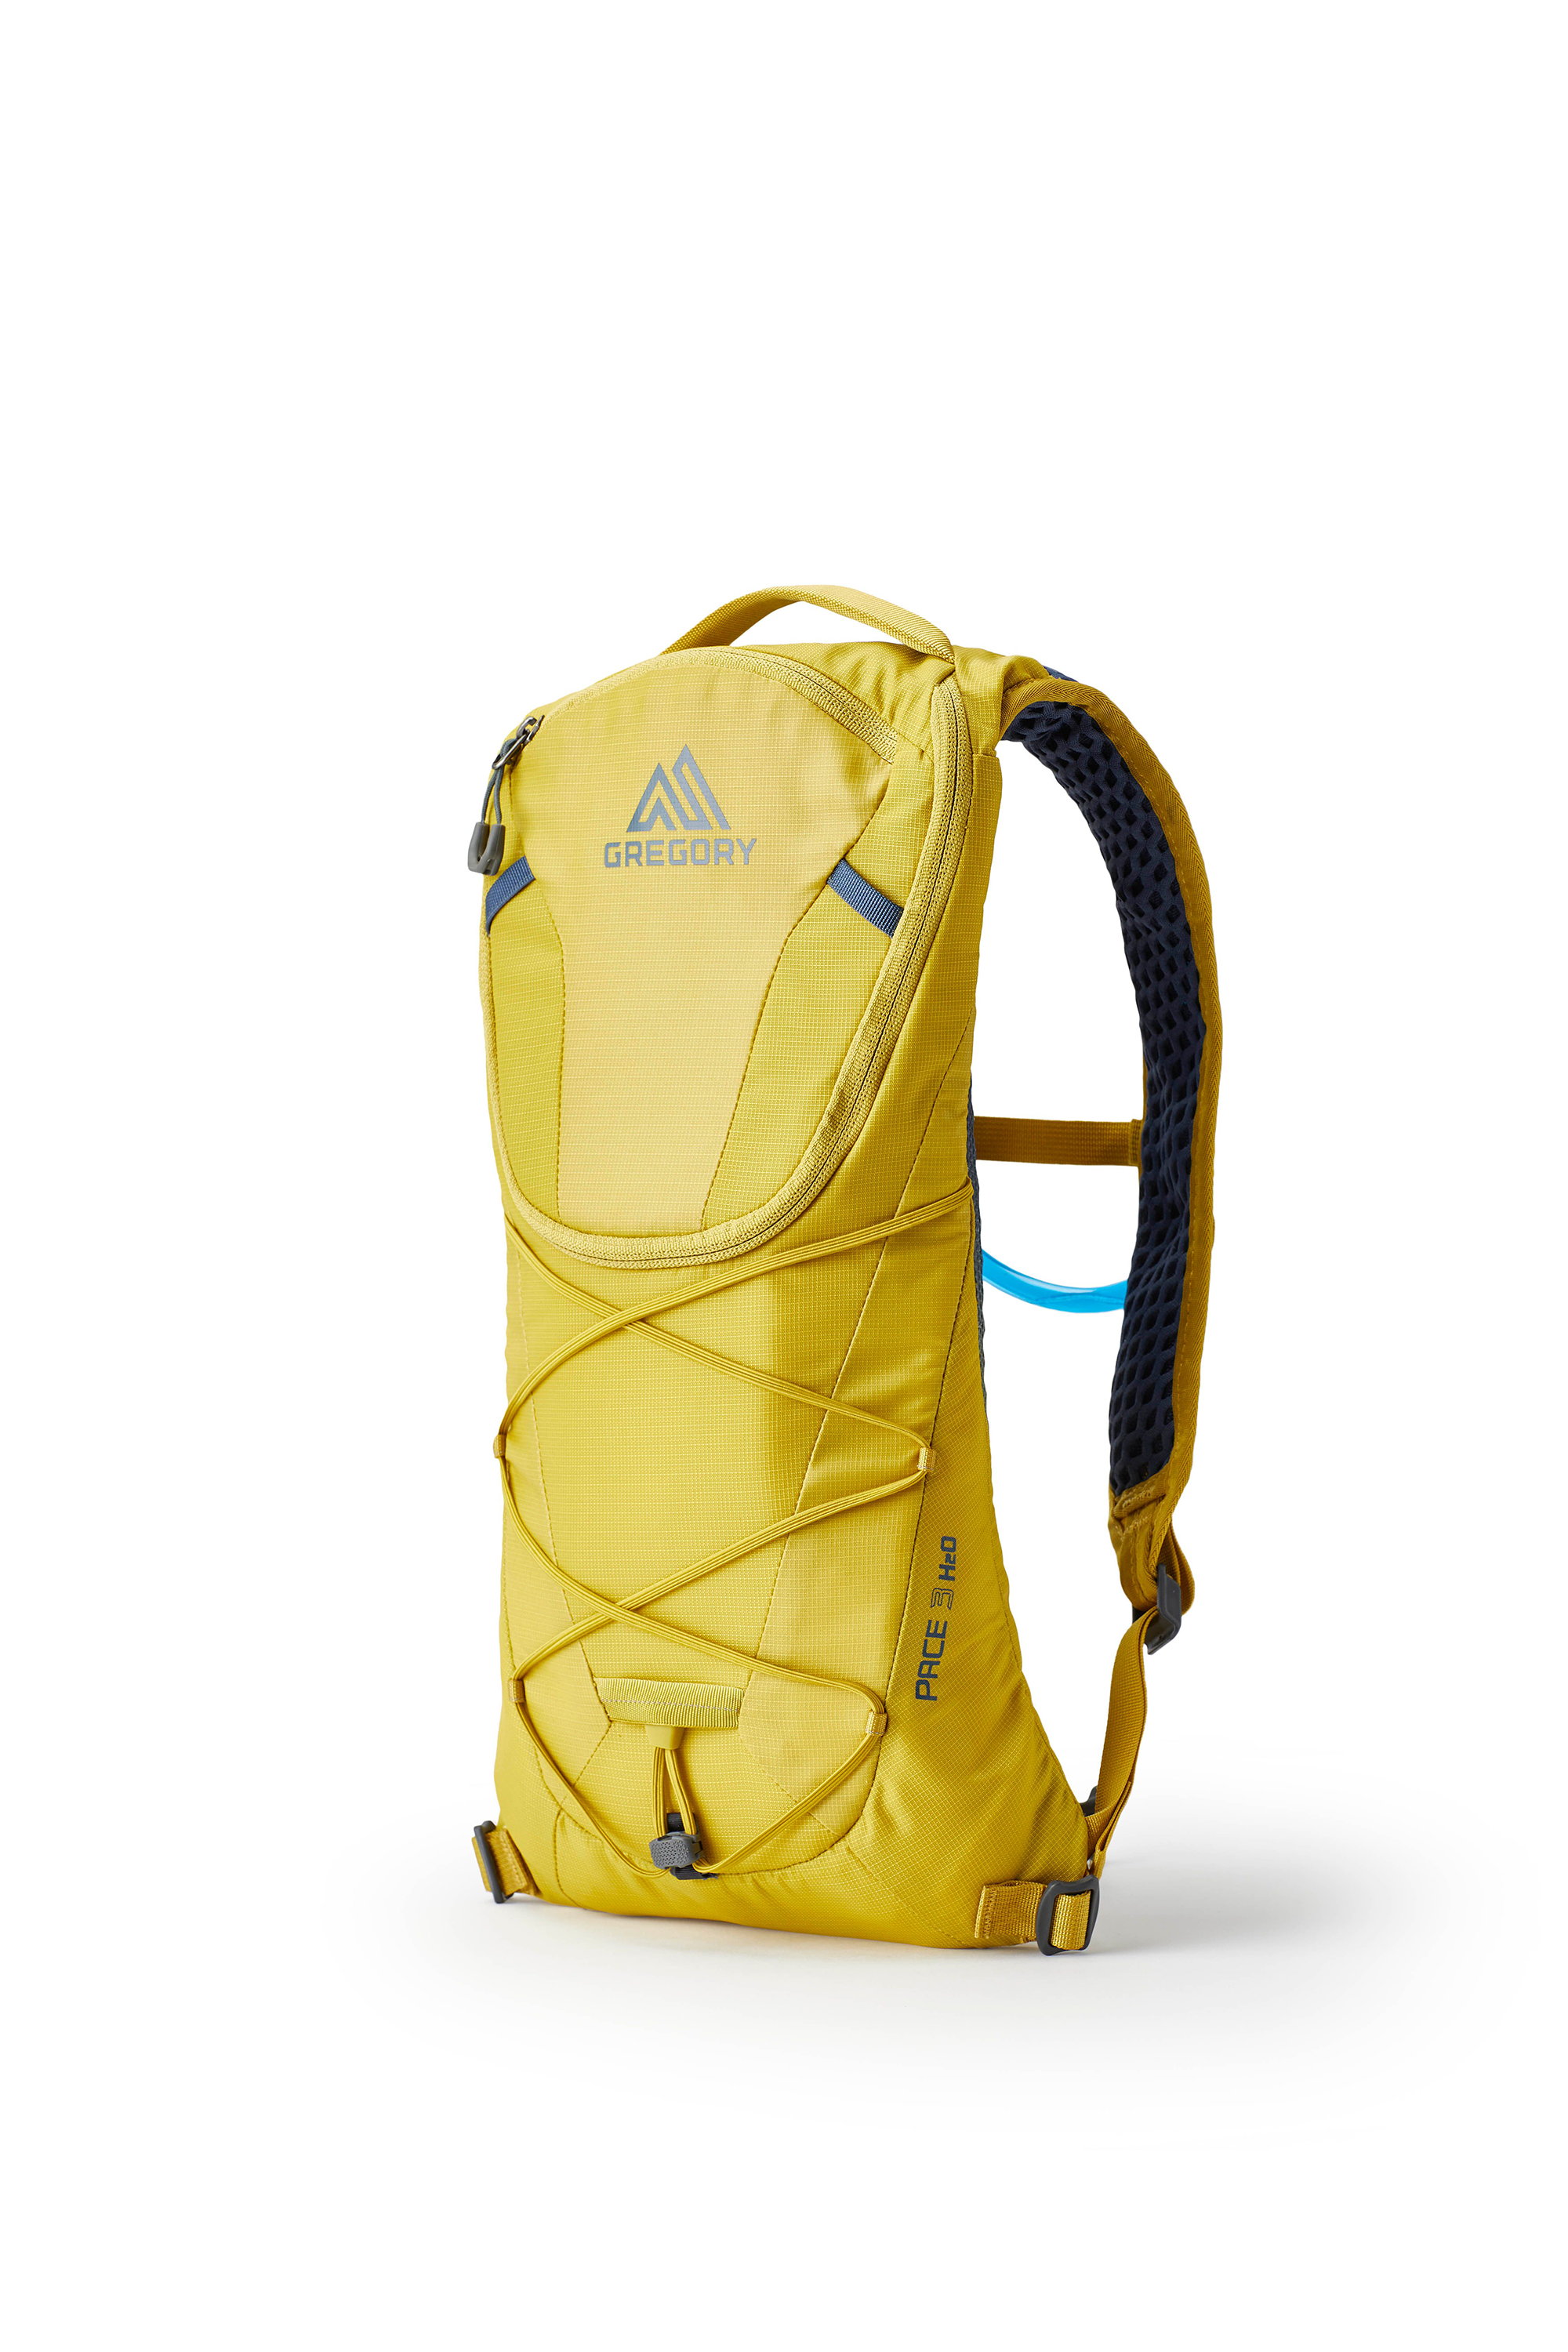 Gregory Pace 3 H2O Hydration Pack for Ladies - Mineral Yellow